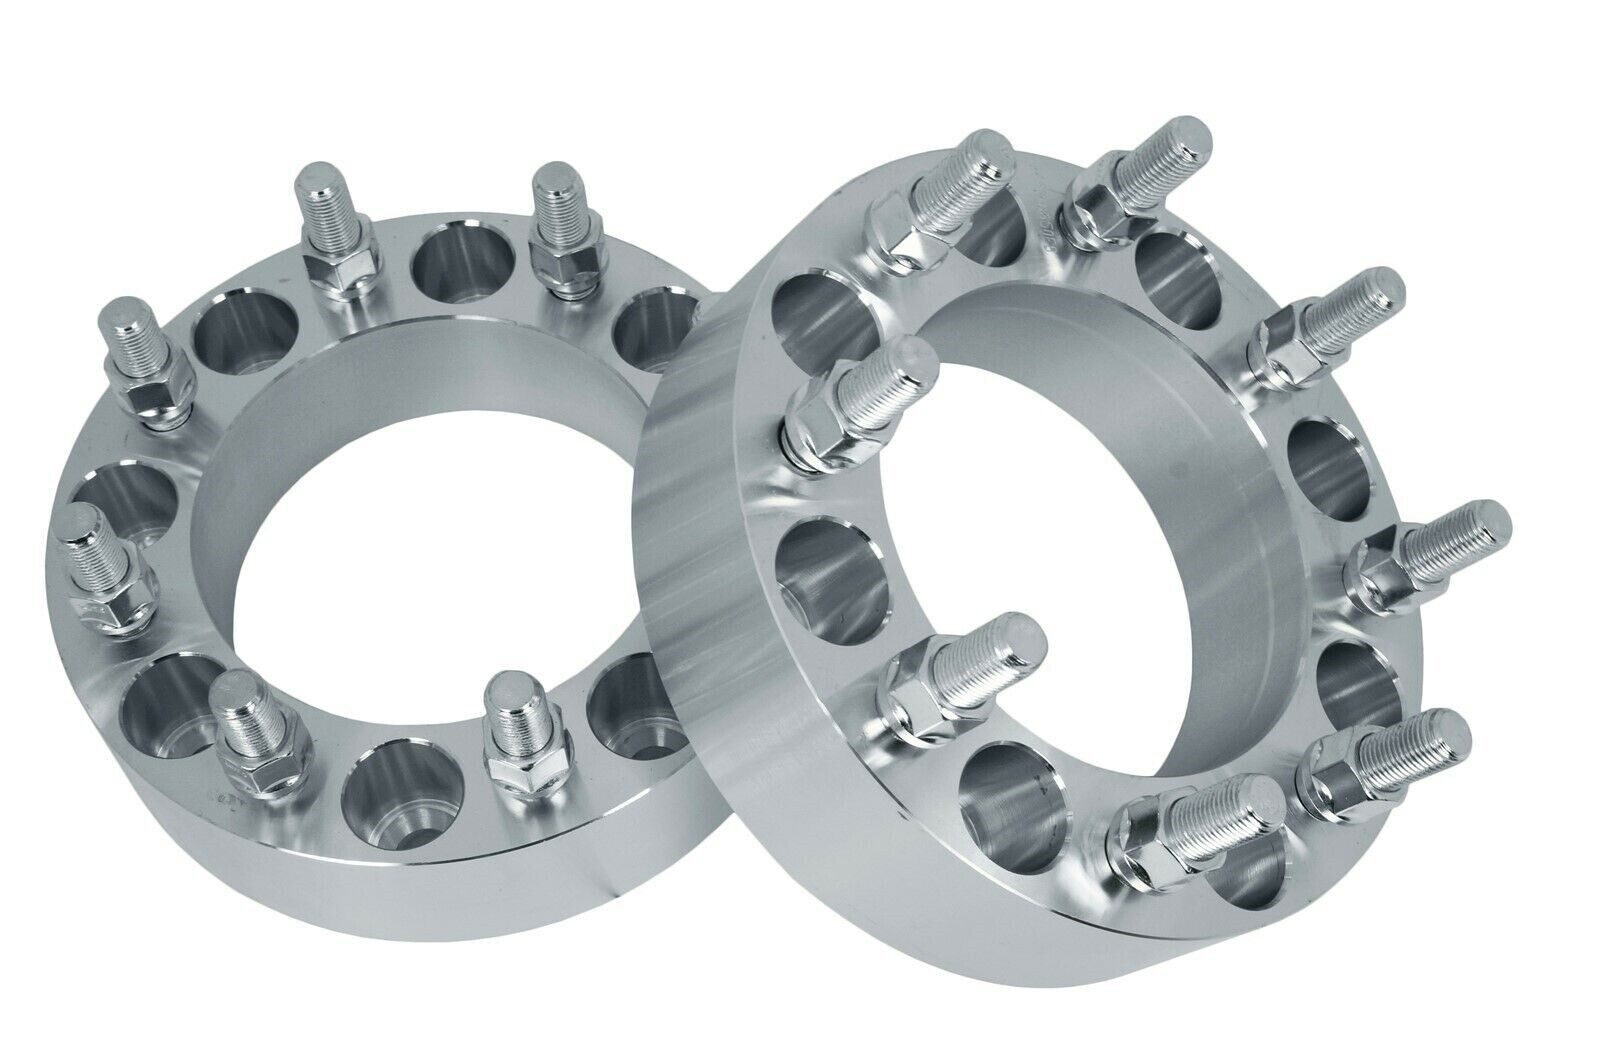 8X210 TO 8X210 WHEEL SPACERS ADAPTERS | CHEVY GMC 3500HD | 2